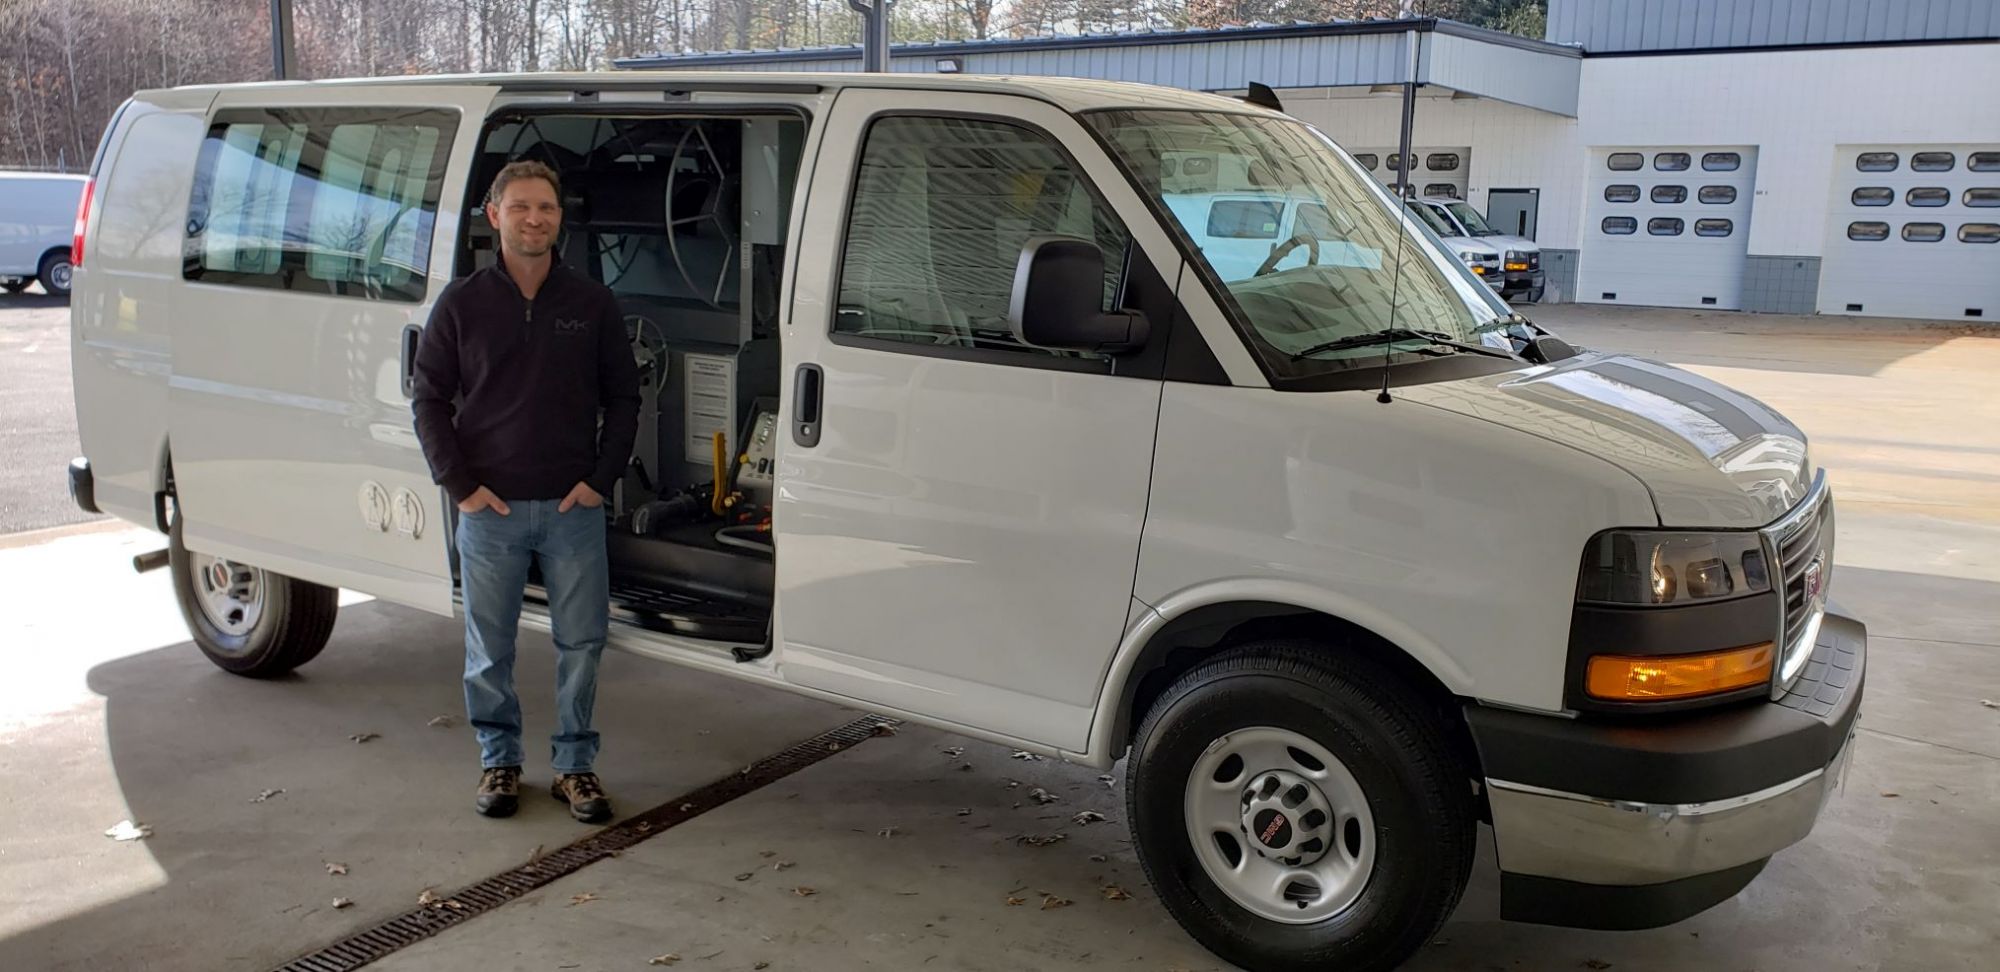 Scott Dumphy of Fyber Clean, Brooklyn , Minnesota purchases new Butler Carpet Cleaning Machine!